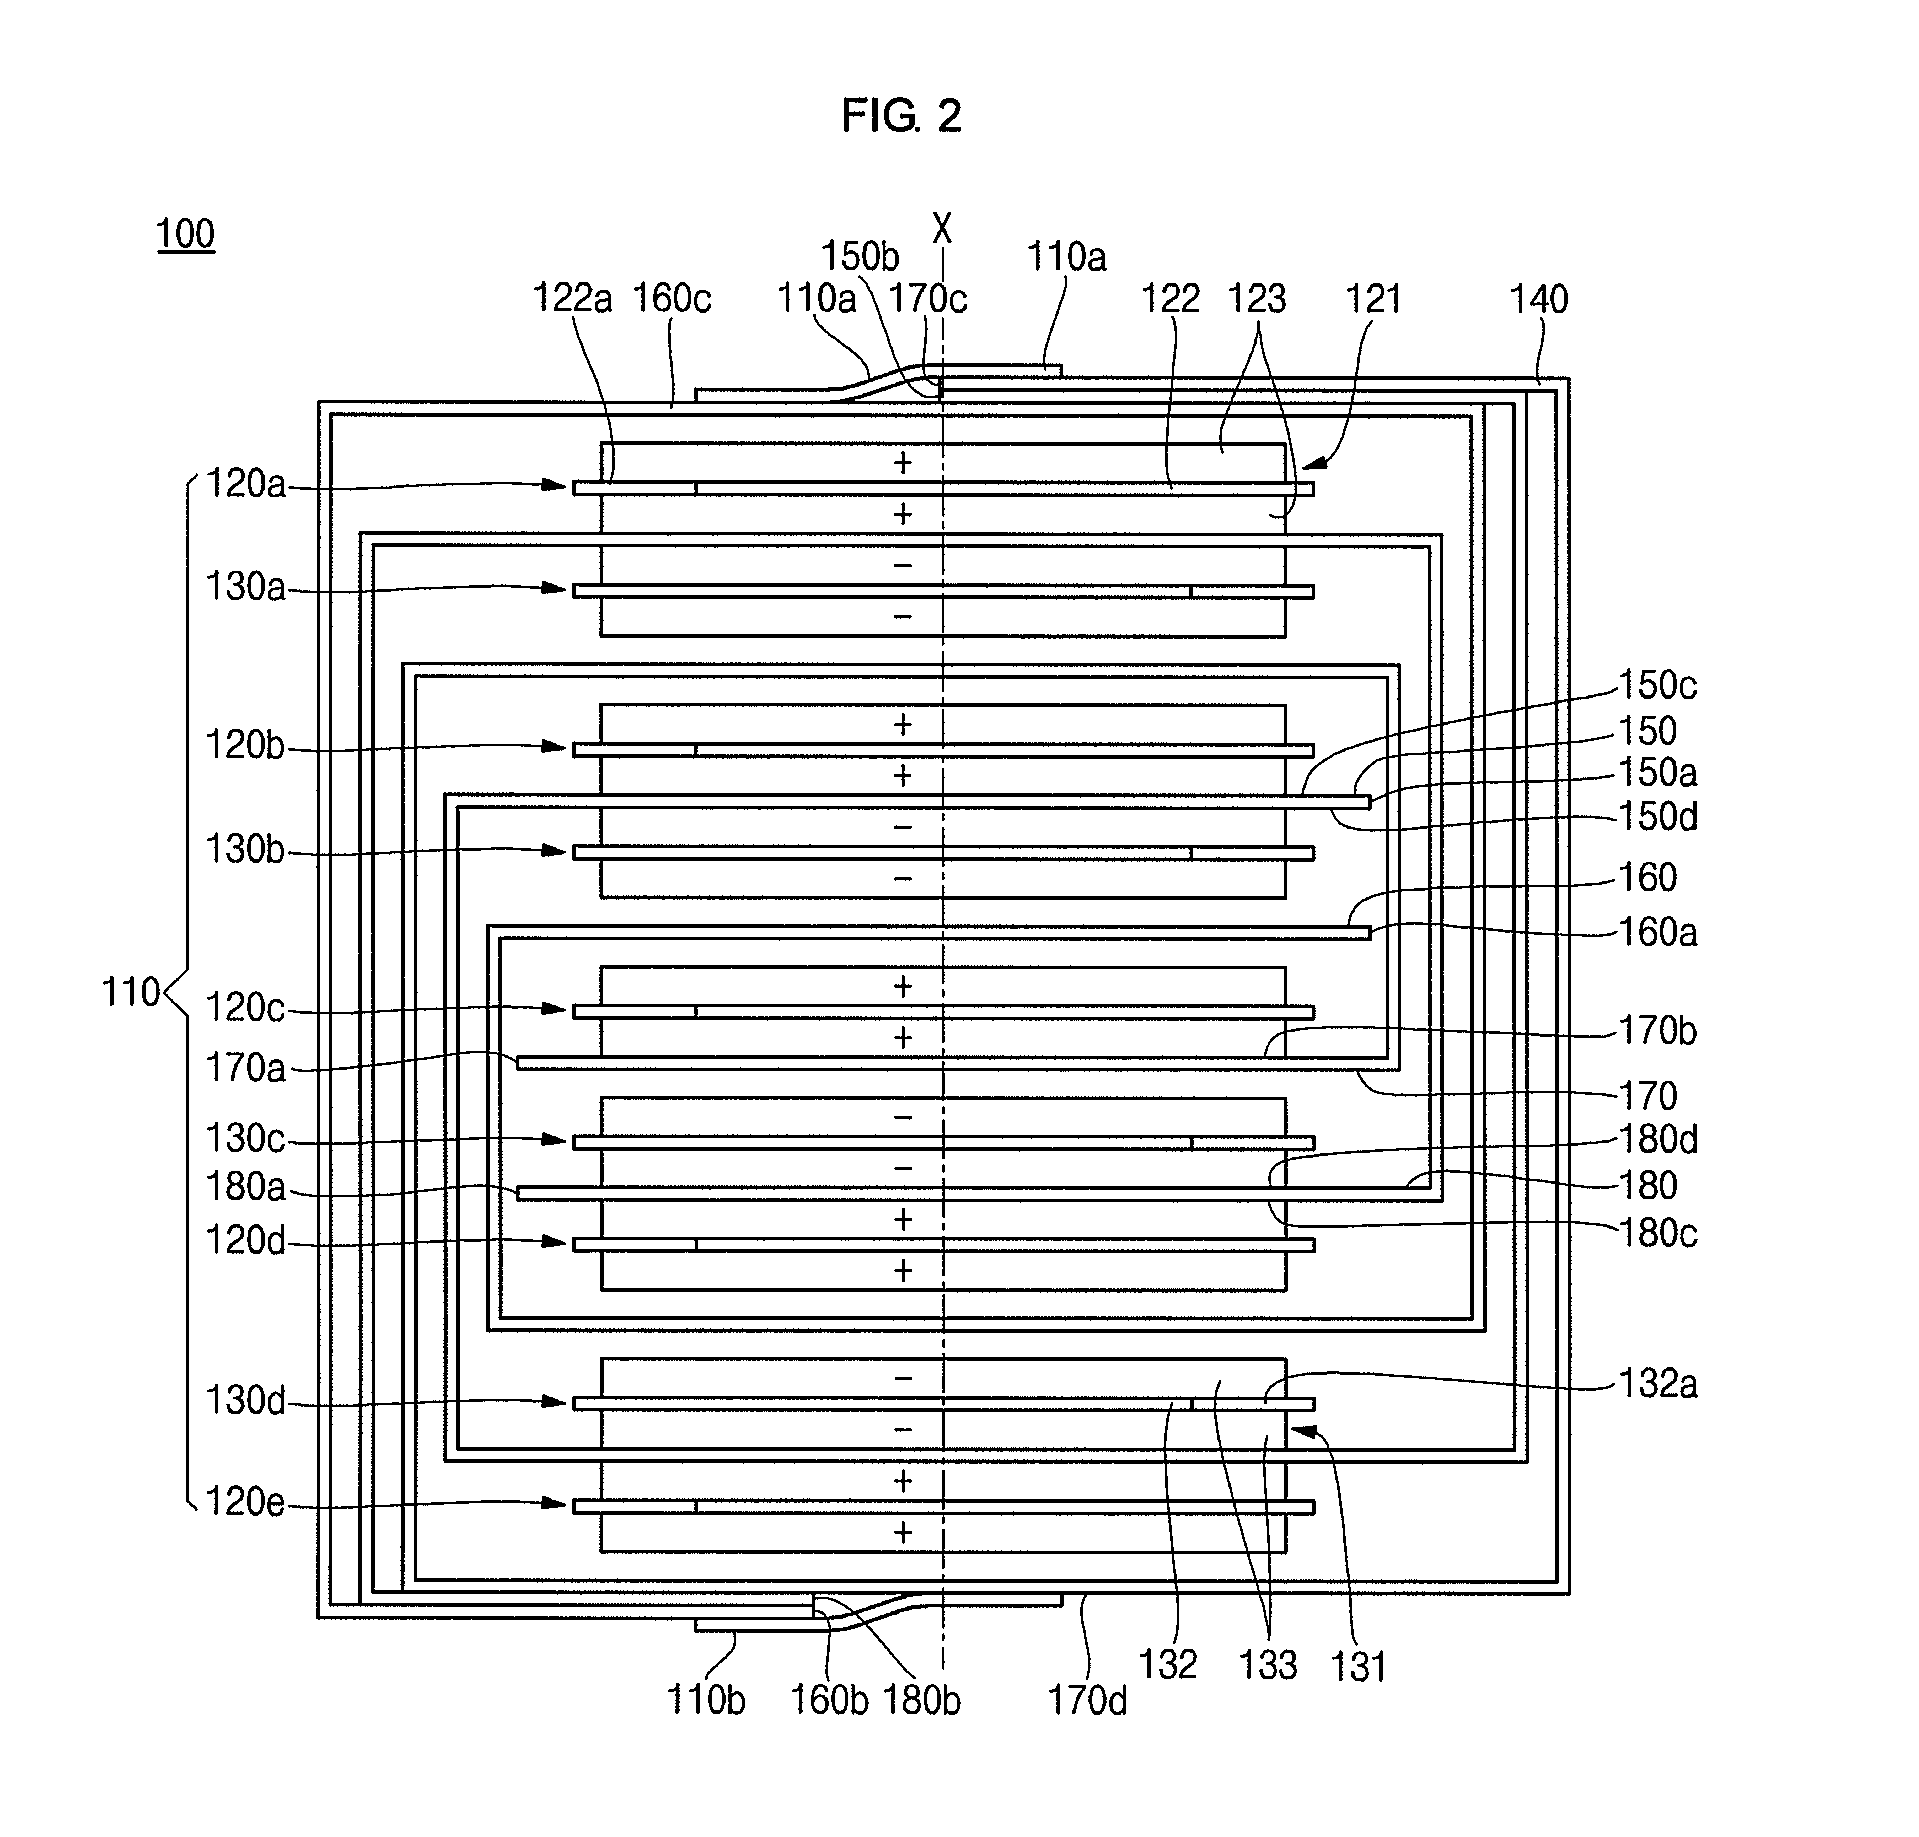 Electrode assembly with multiple separators wound about a winding center